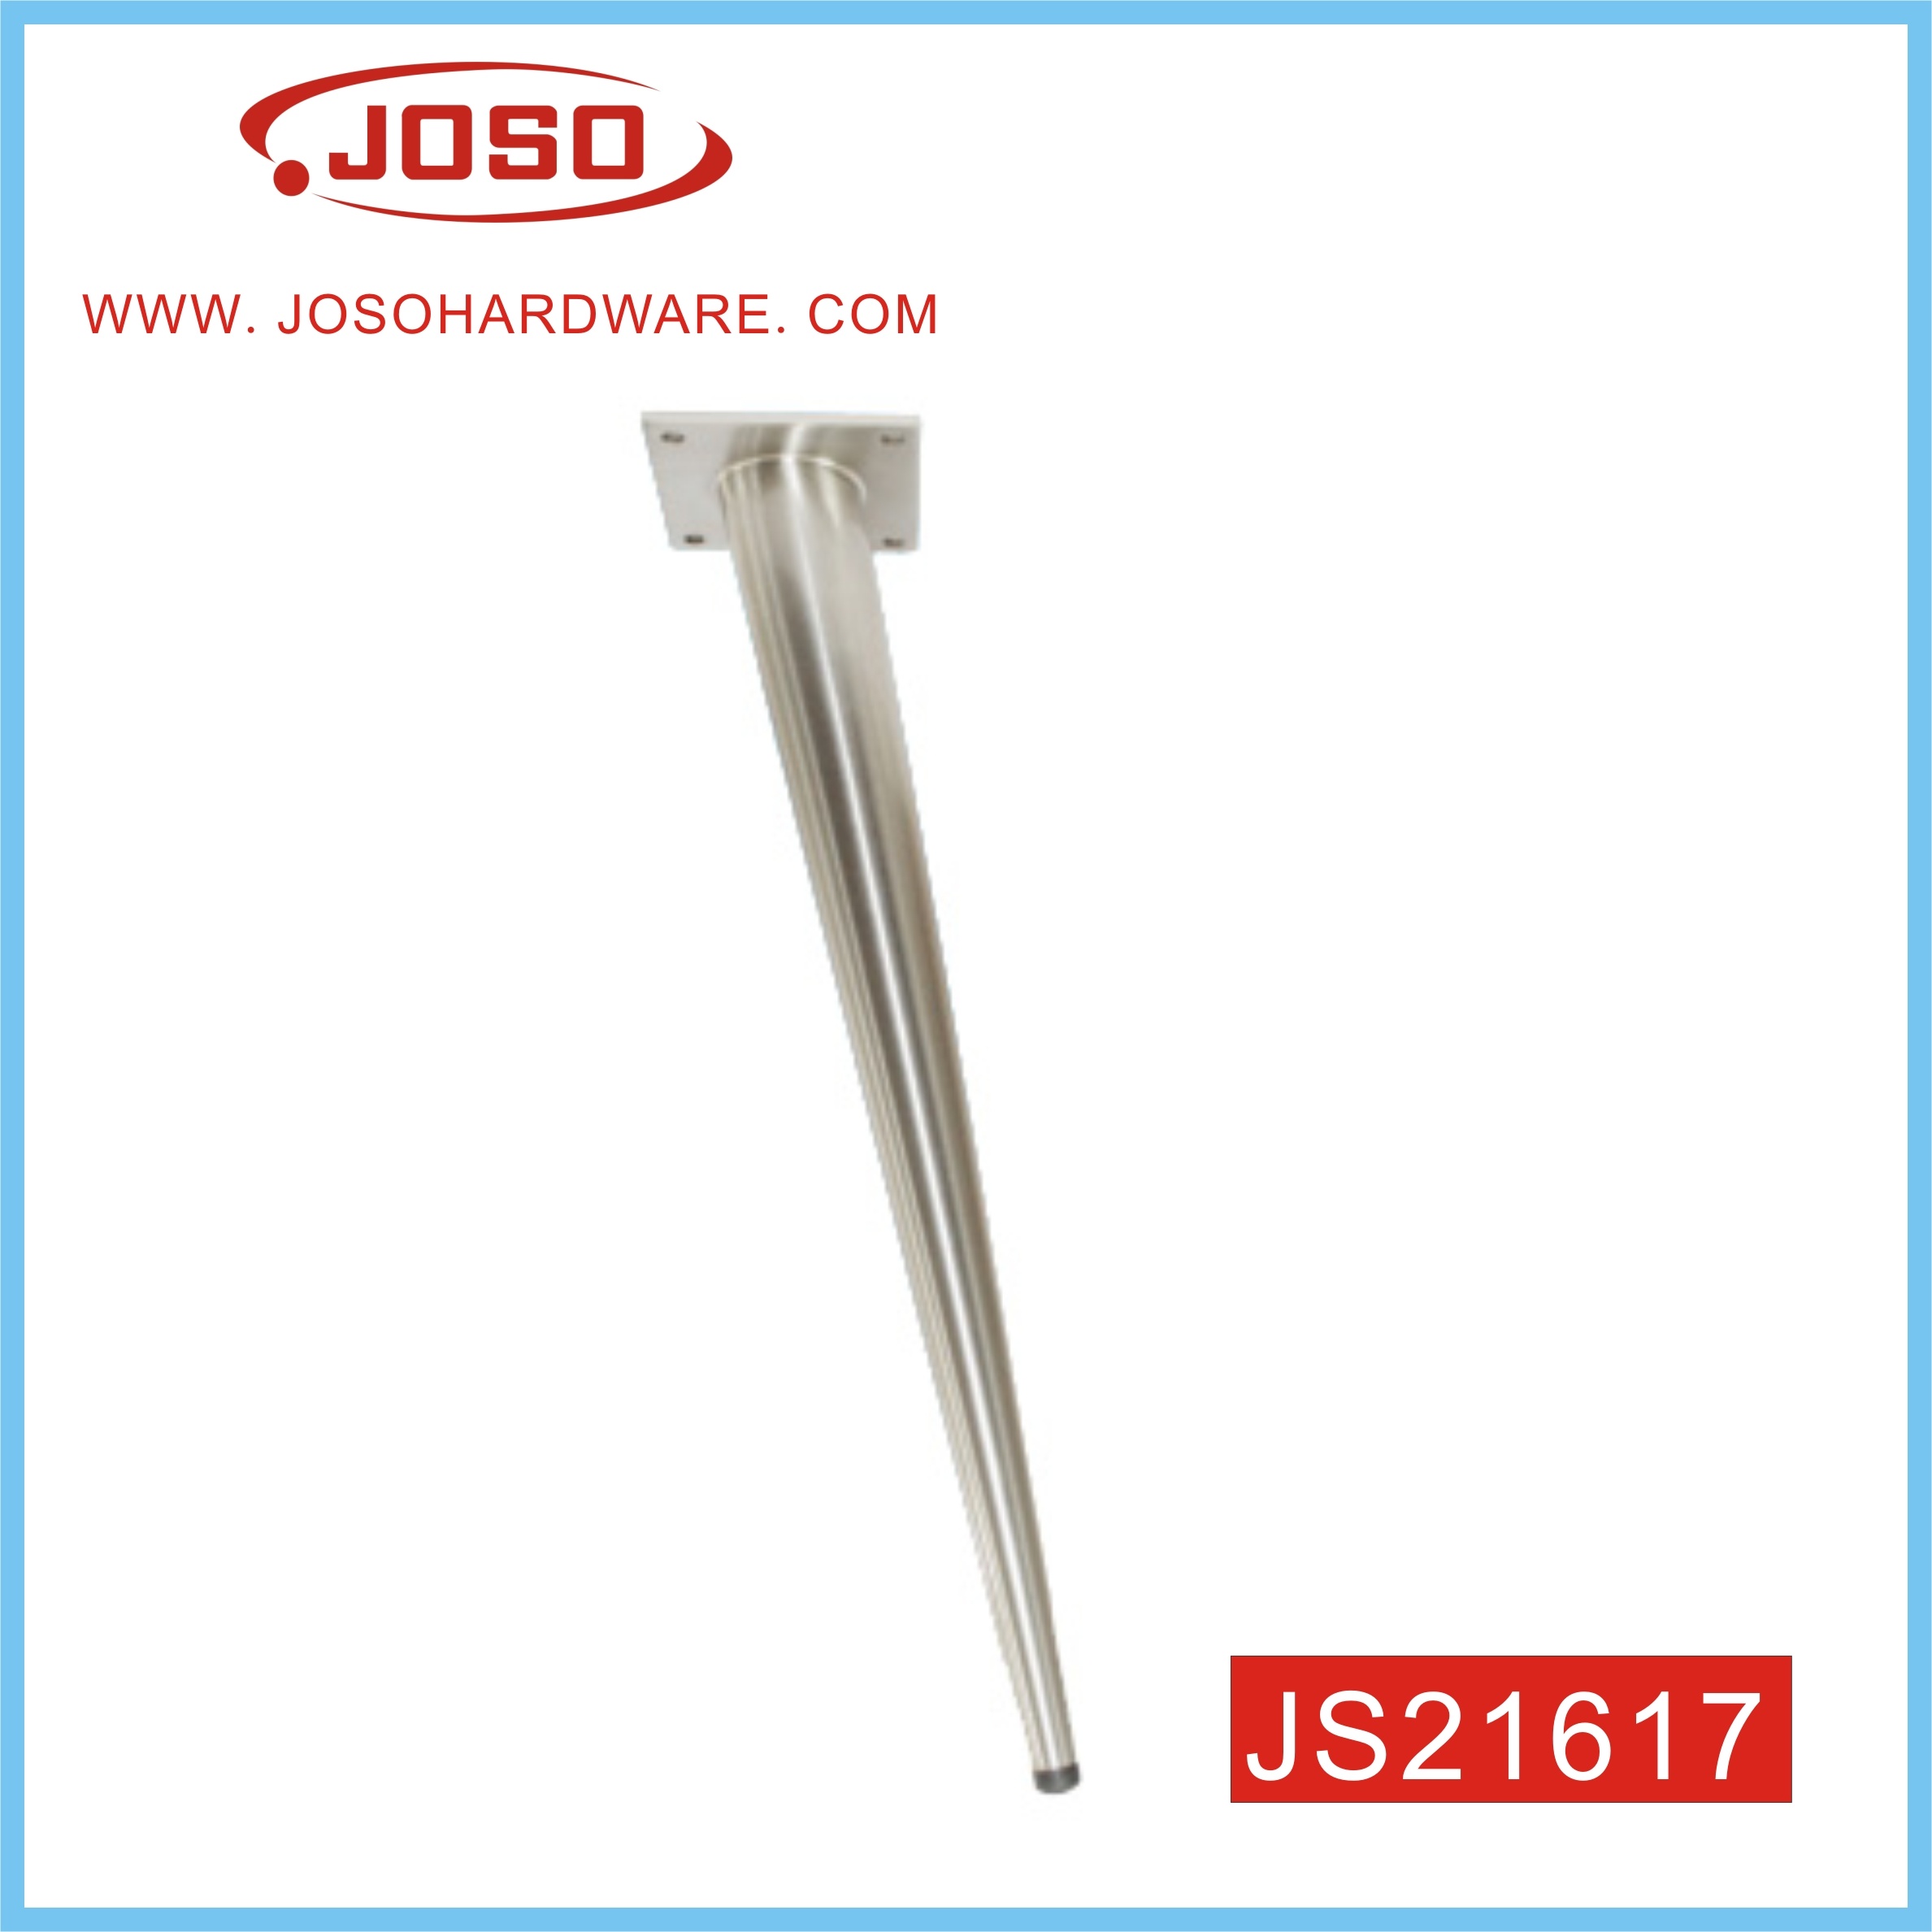 Hot Selling Metal Furnitue Leg for Chair